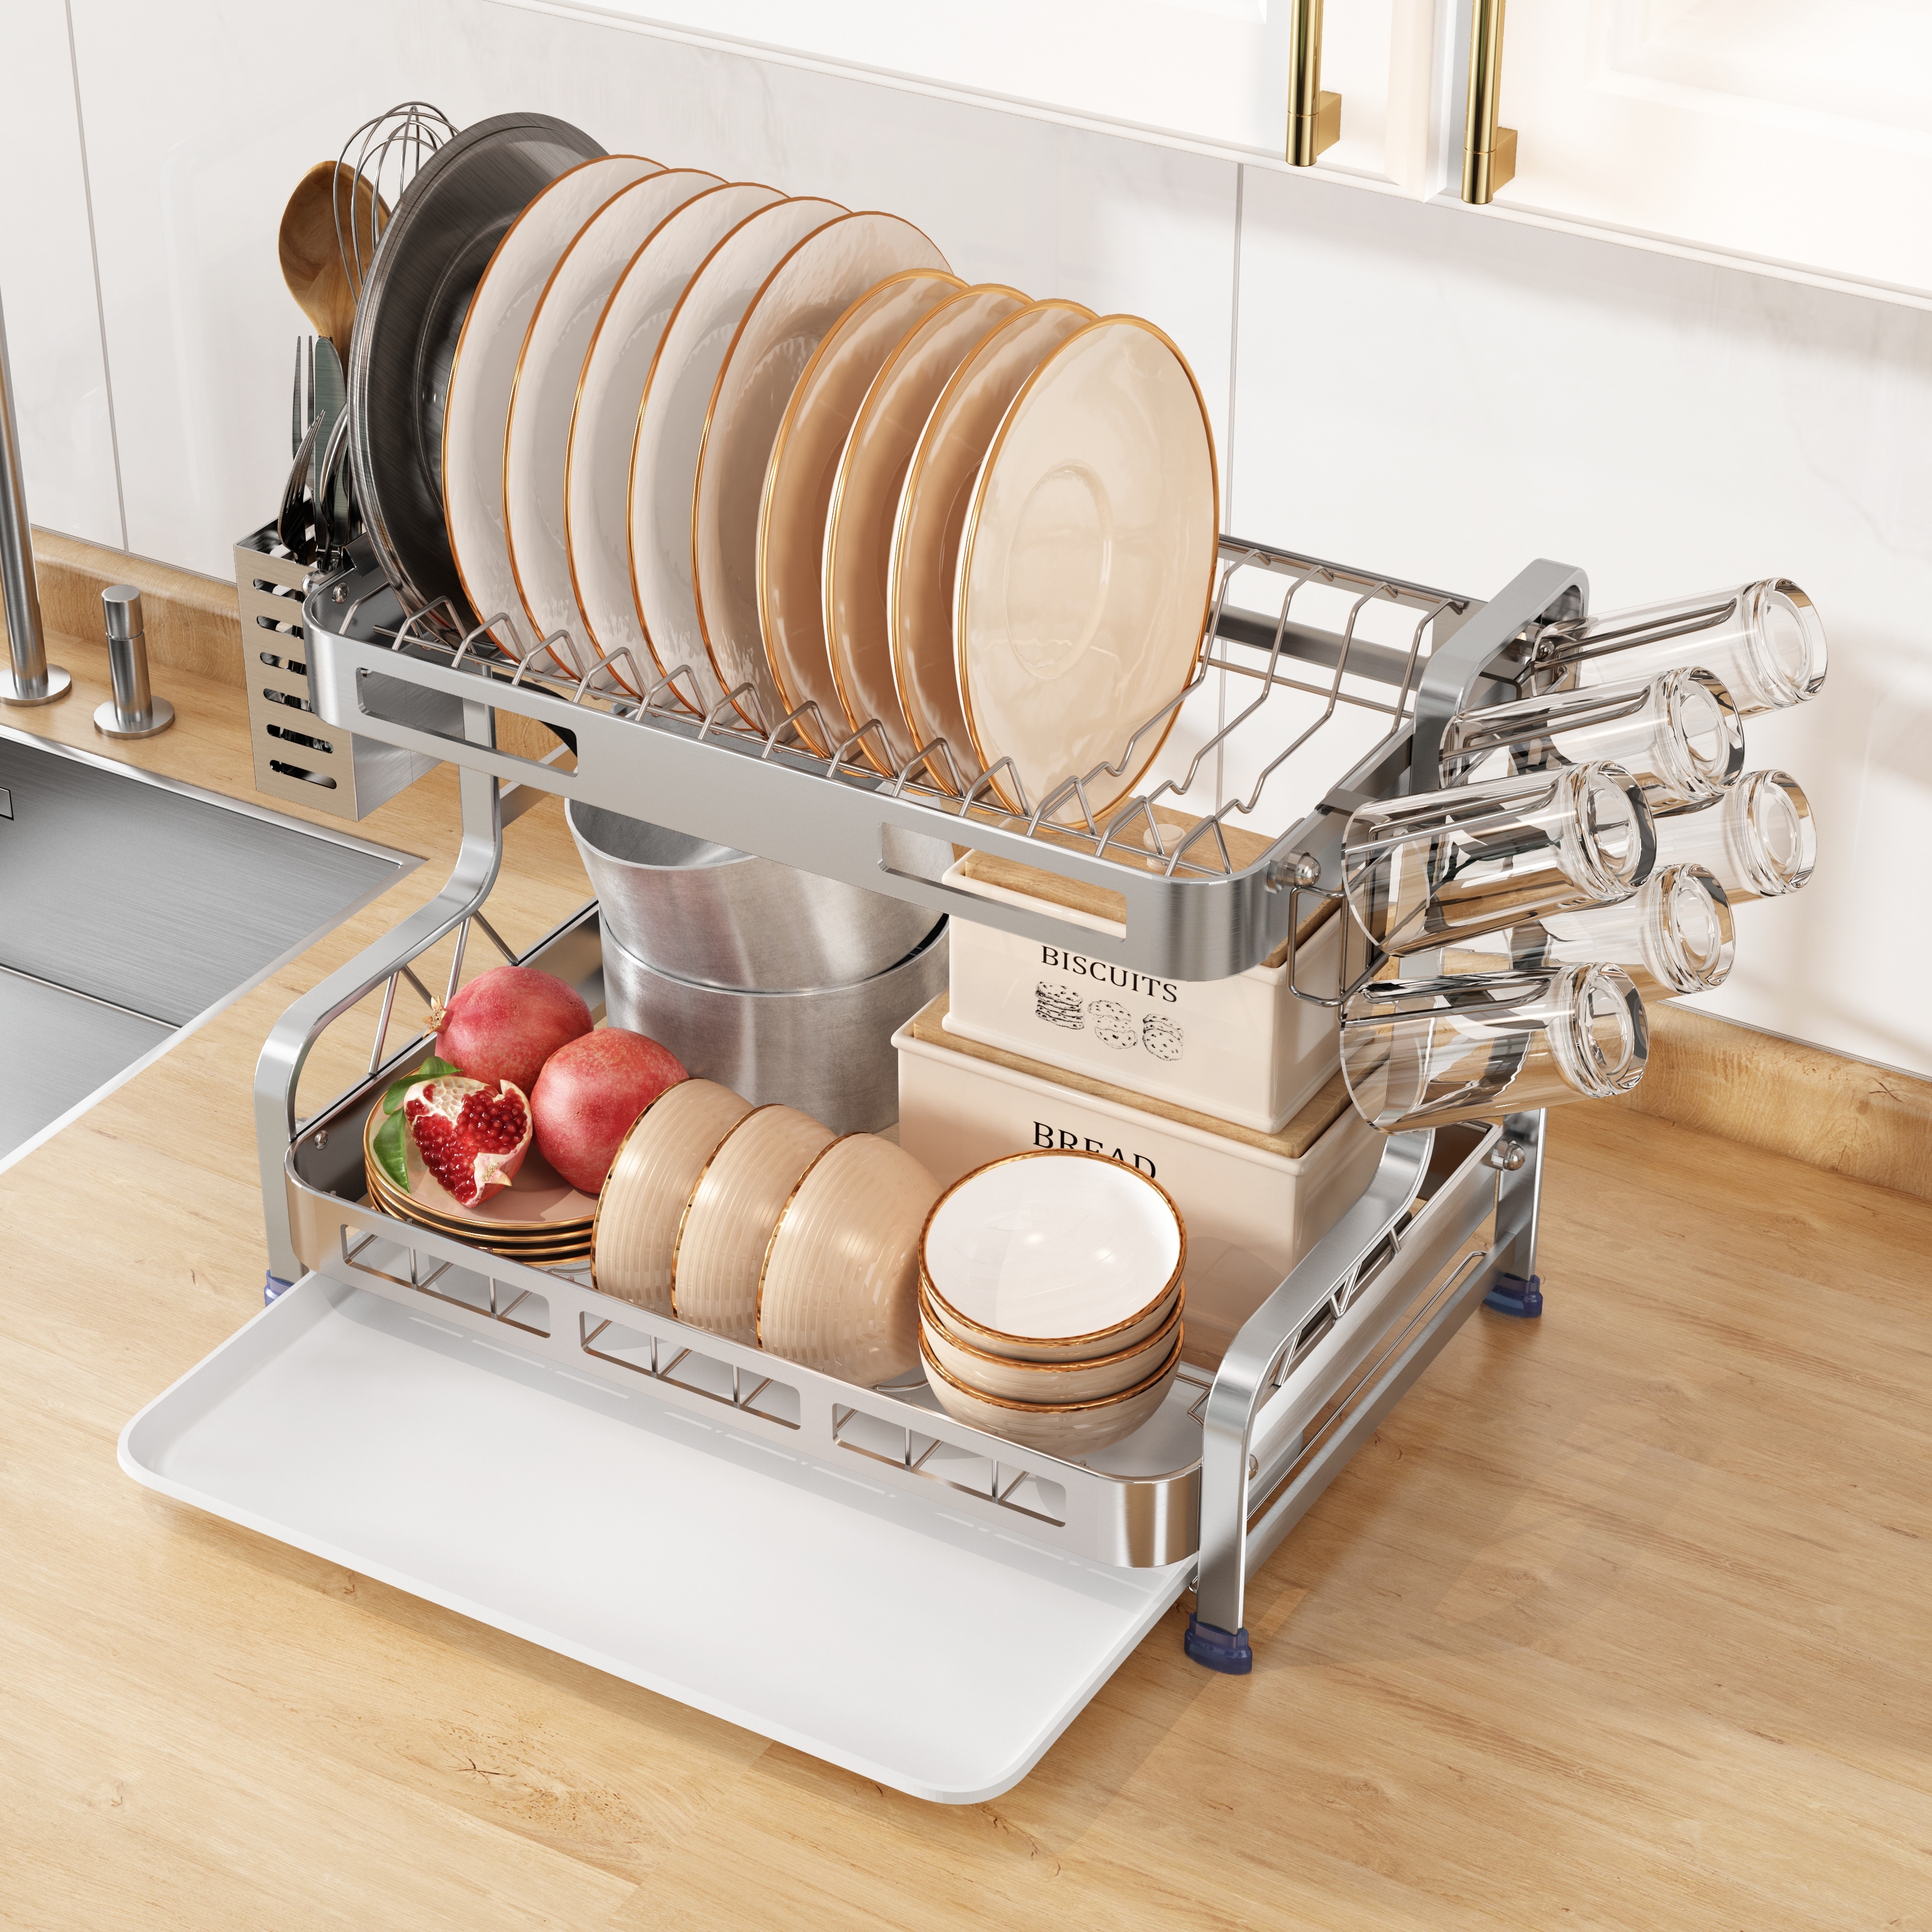 2-Tier Dish Drying Rack with Drainboard - On Sale - Bed Bath & Beyond -  37477747